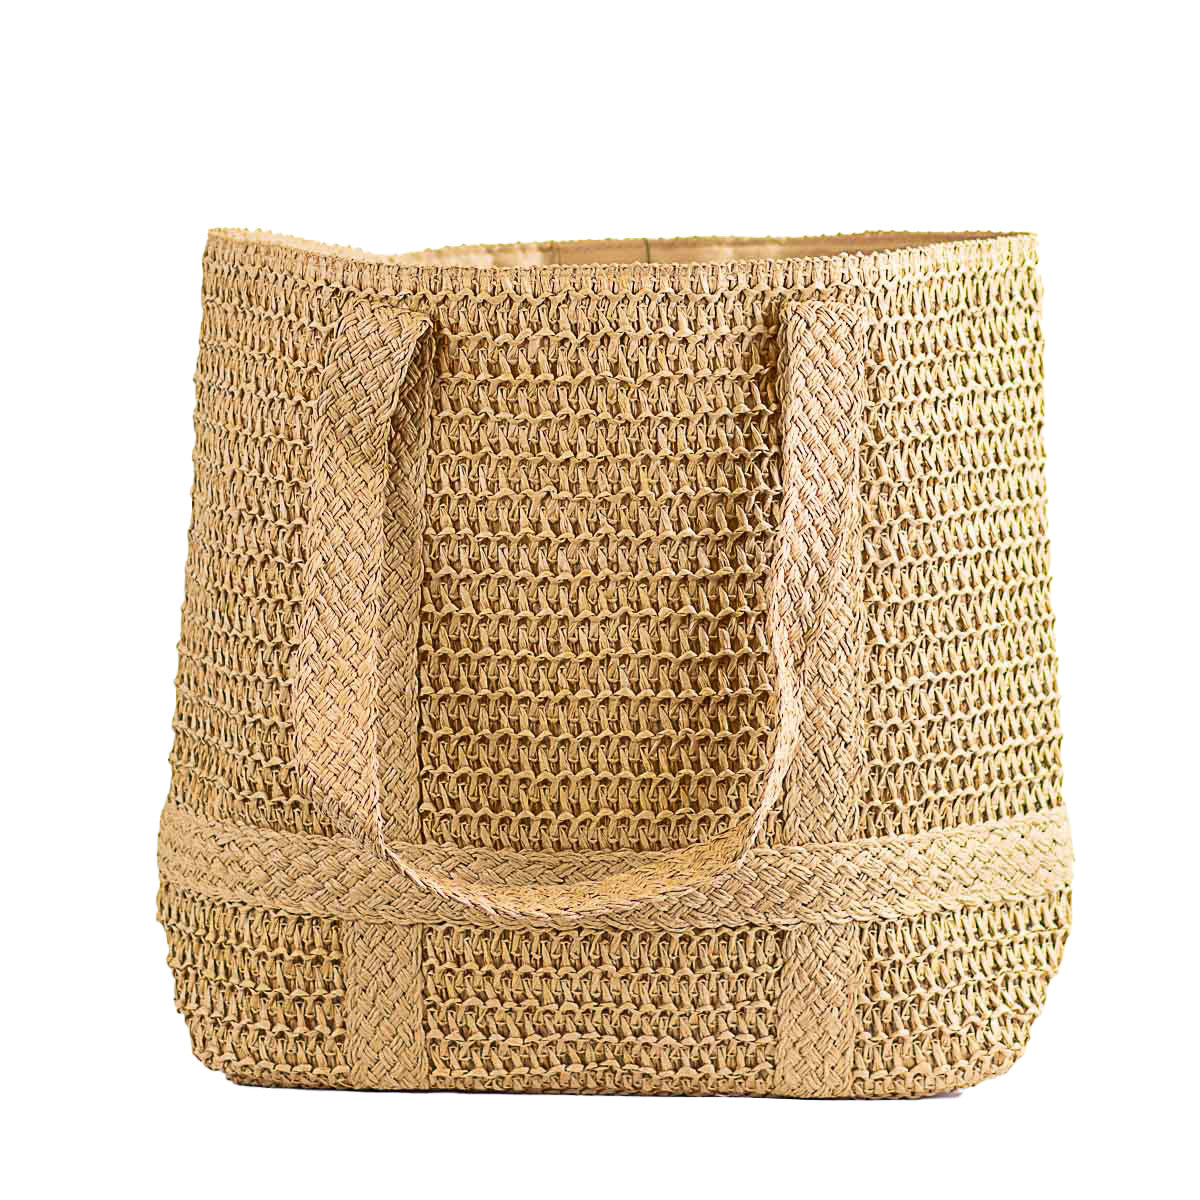 Andros Straw Tote in Natural